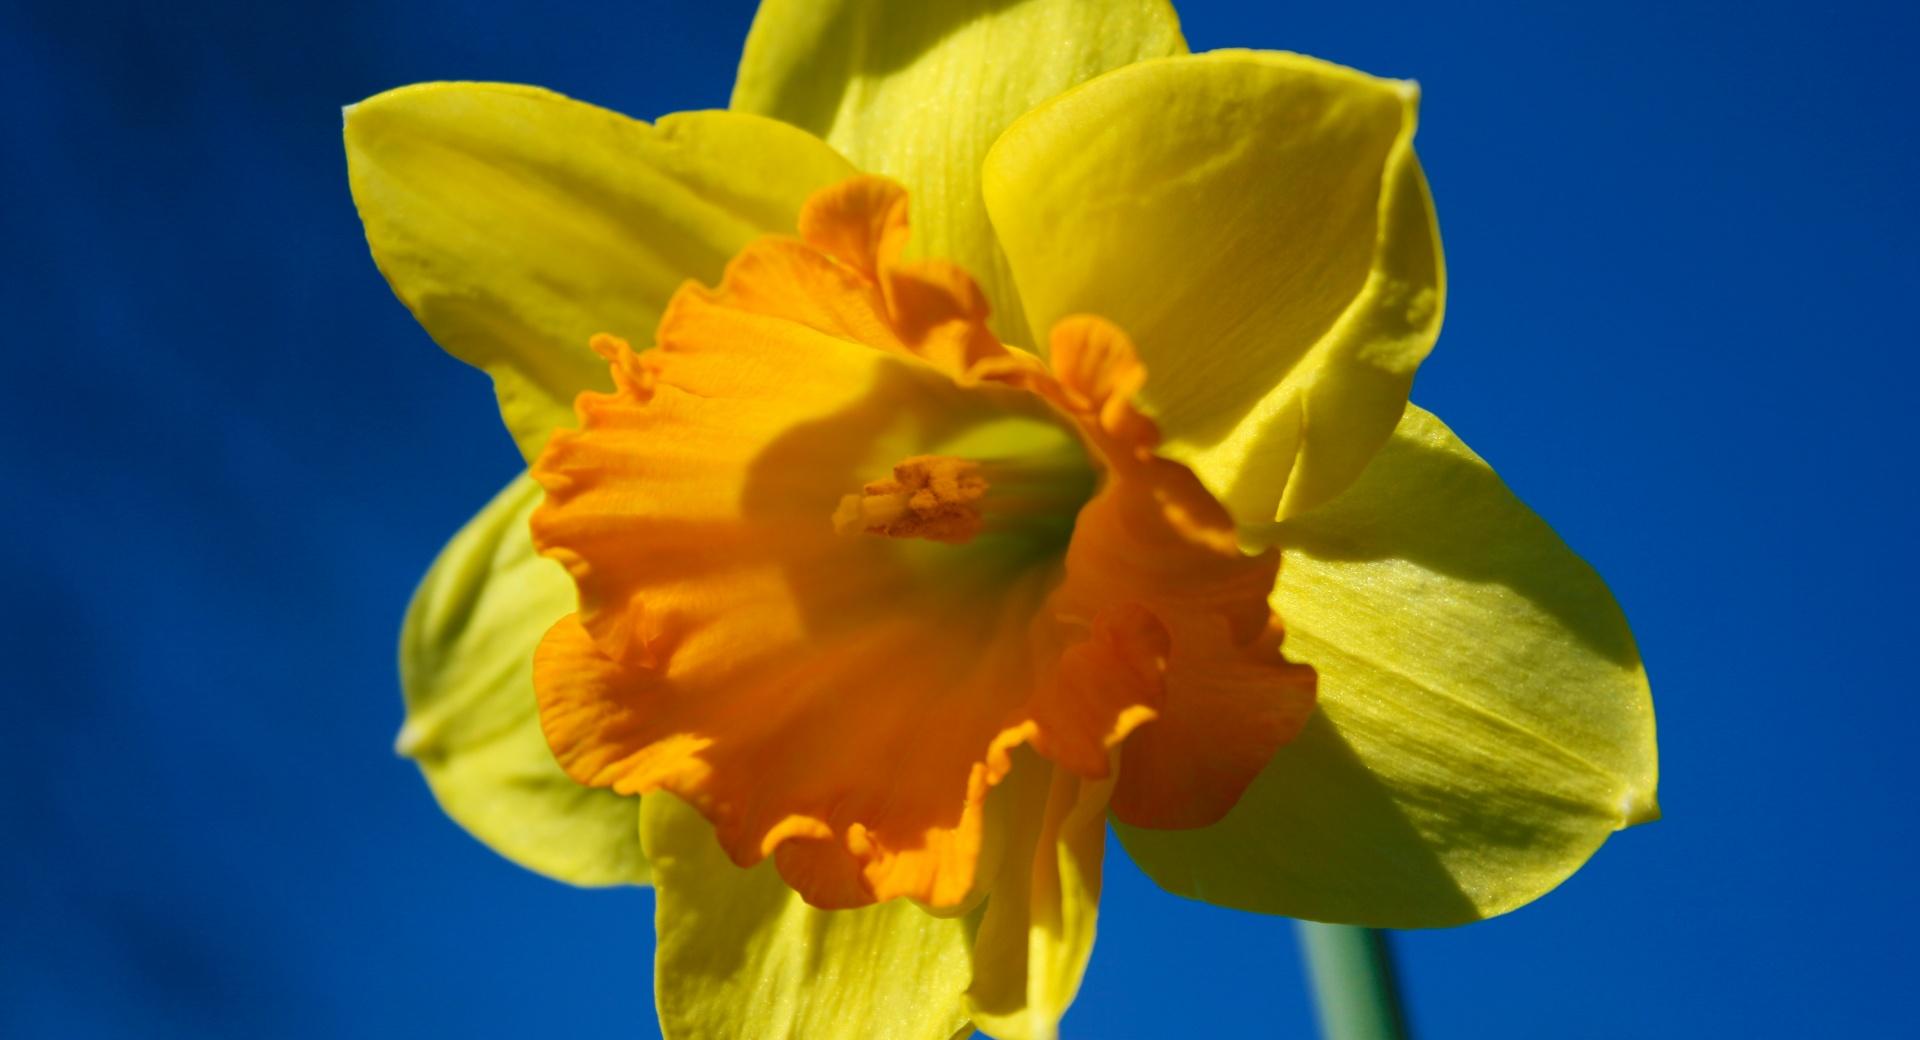 Daffodil Flower Against Blue Sky wallpapers HD quality